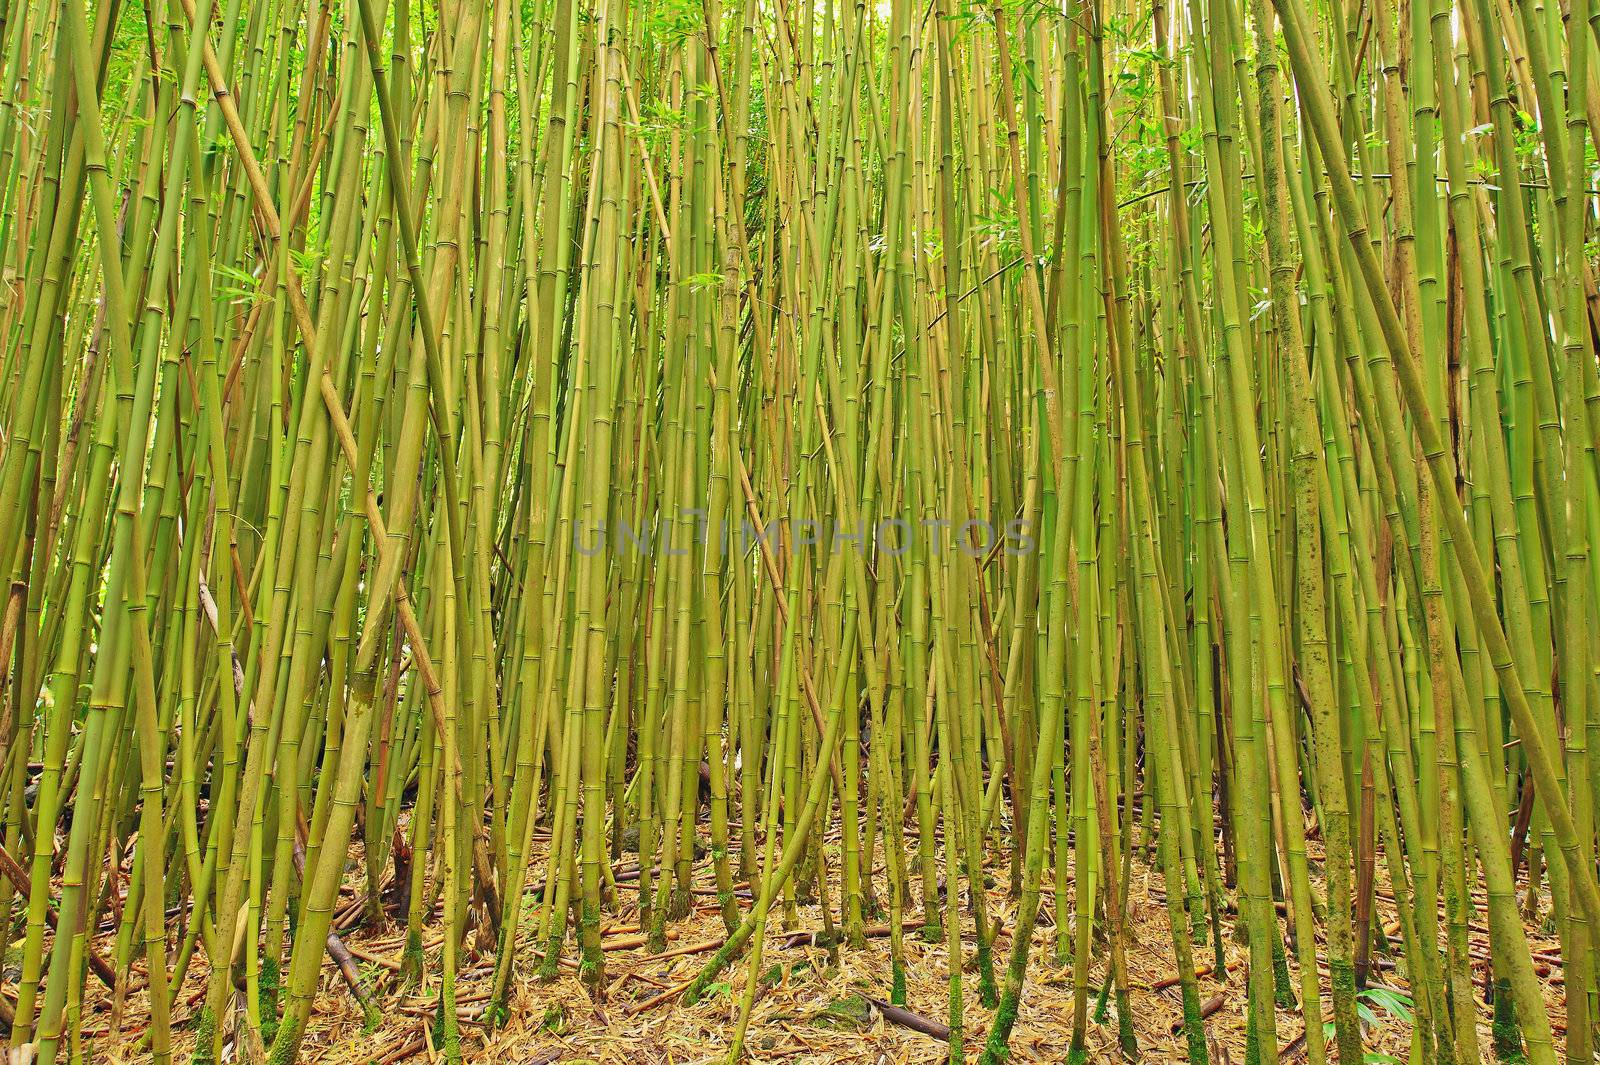 Wide angle of a Bamboo Forest in Hana, Maui